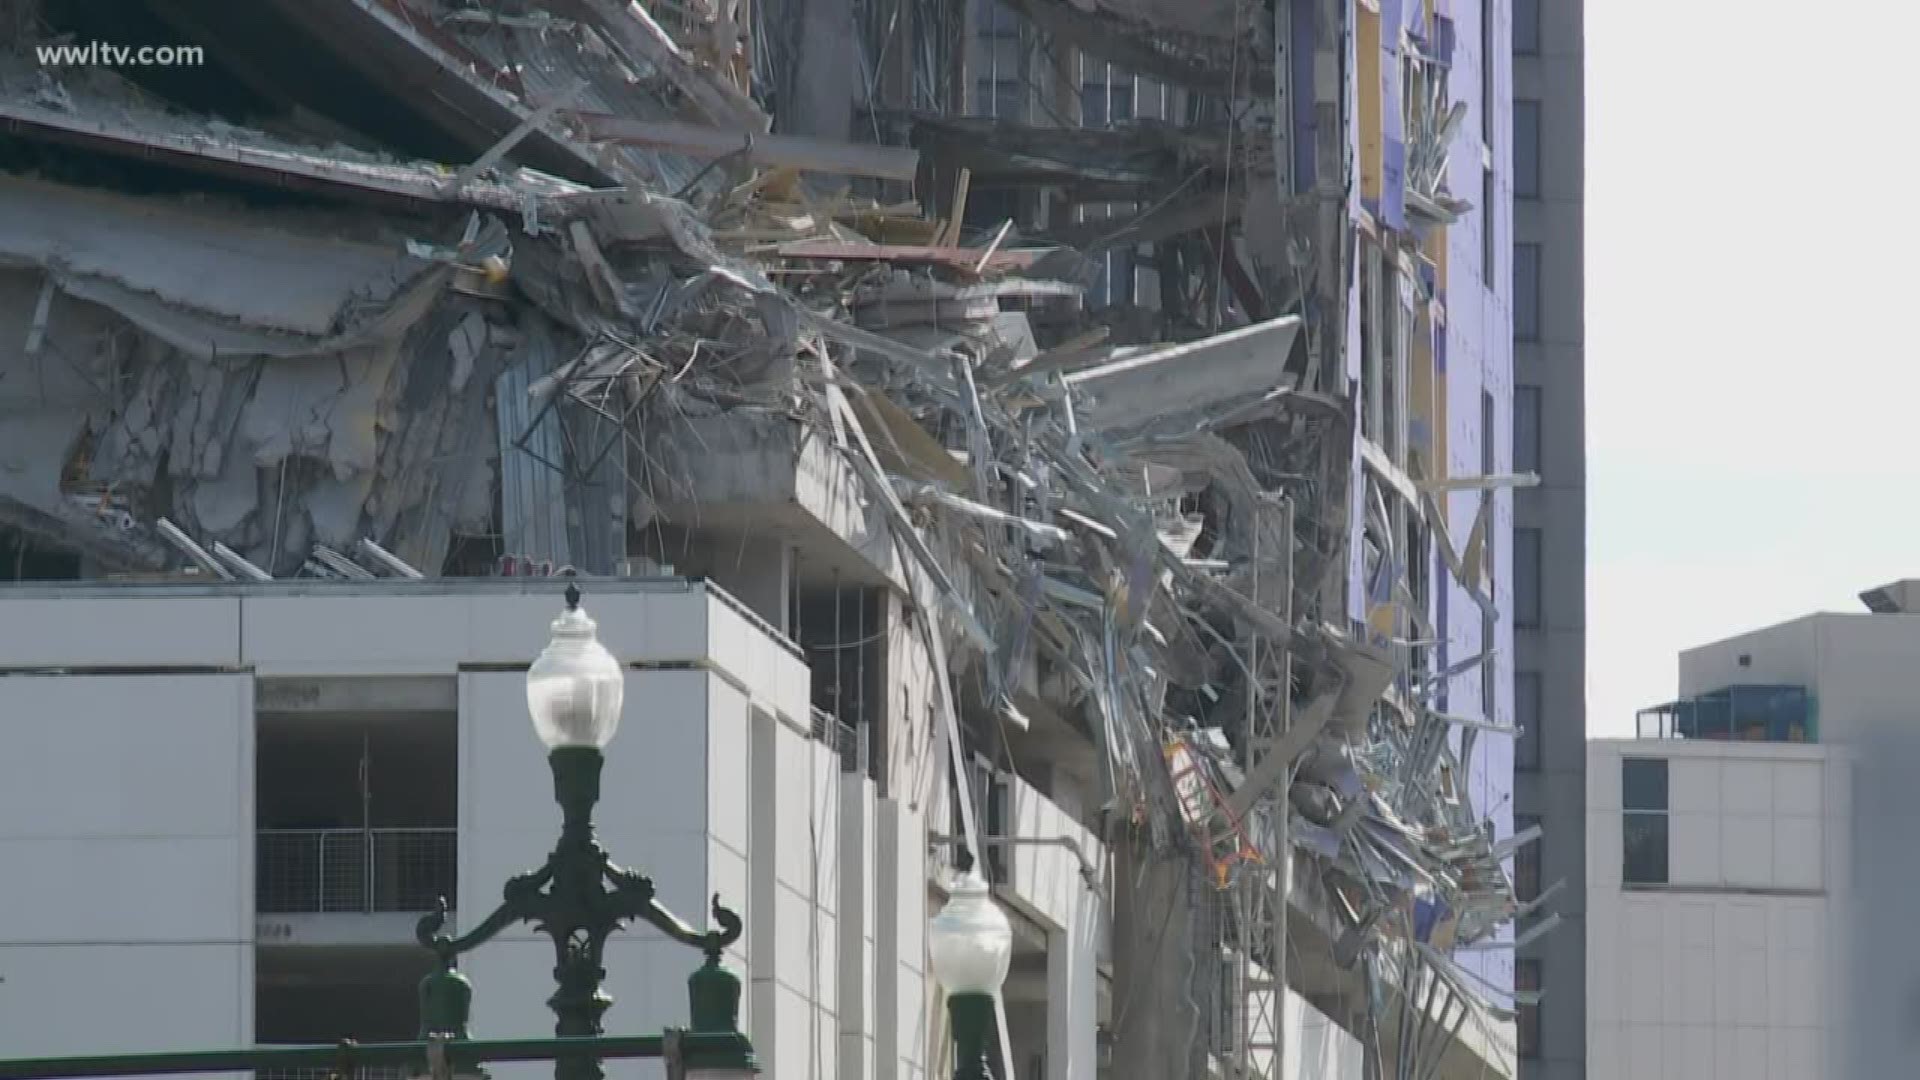 Worker saves colleagues from Hard Rock Hotel collapse